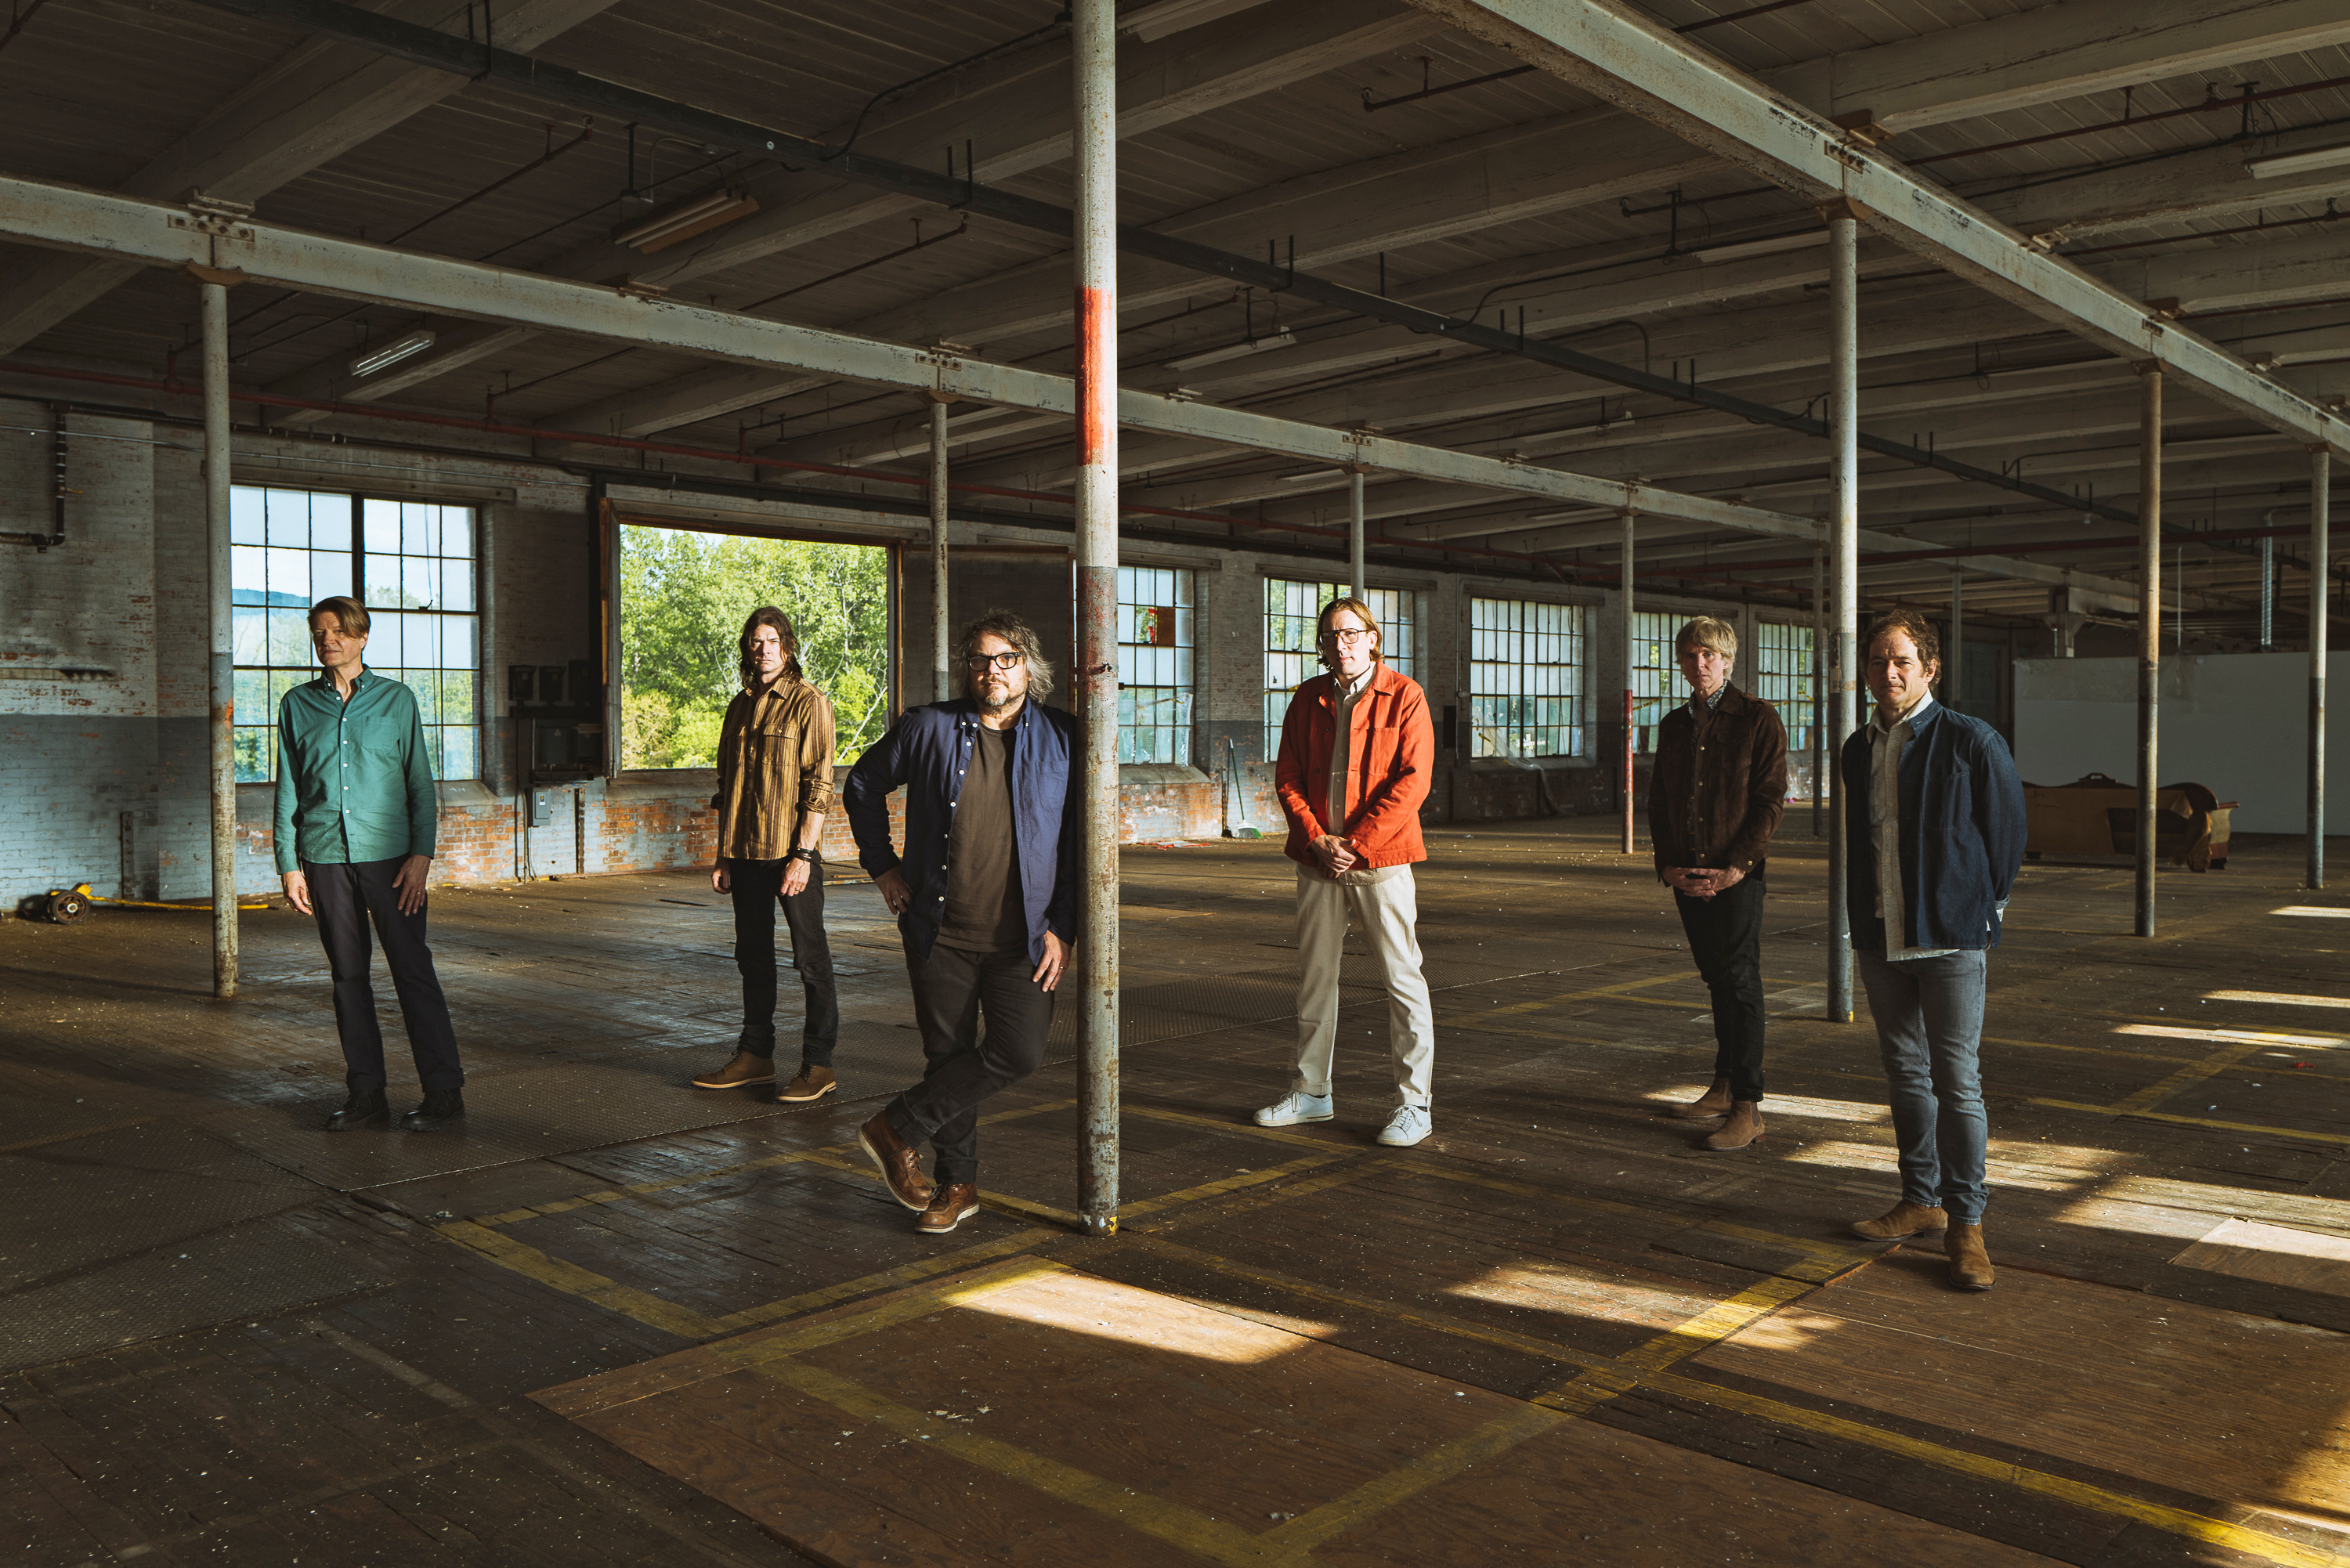 Standing inside an industrial space, Wilco faces the camera